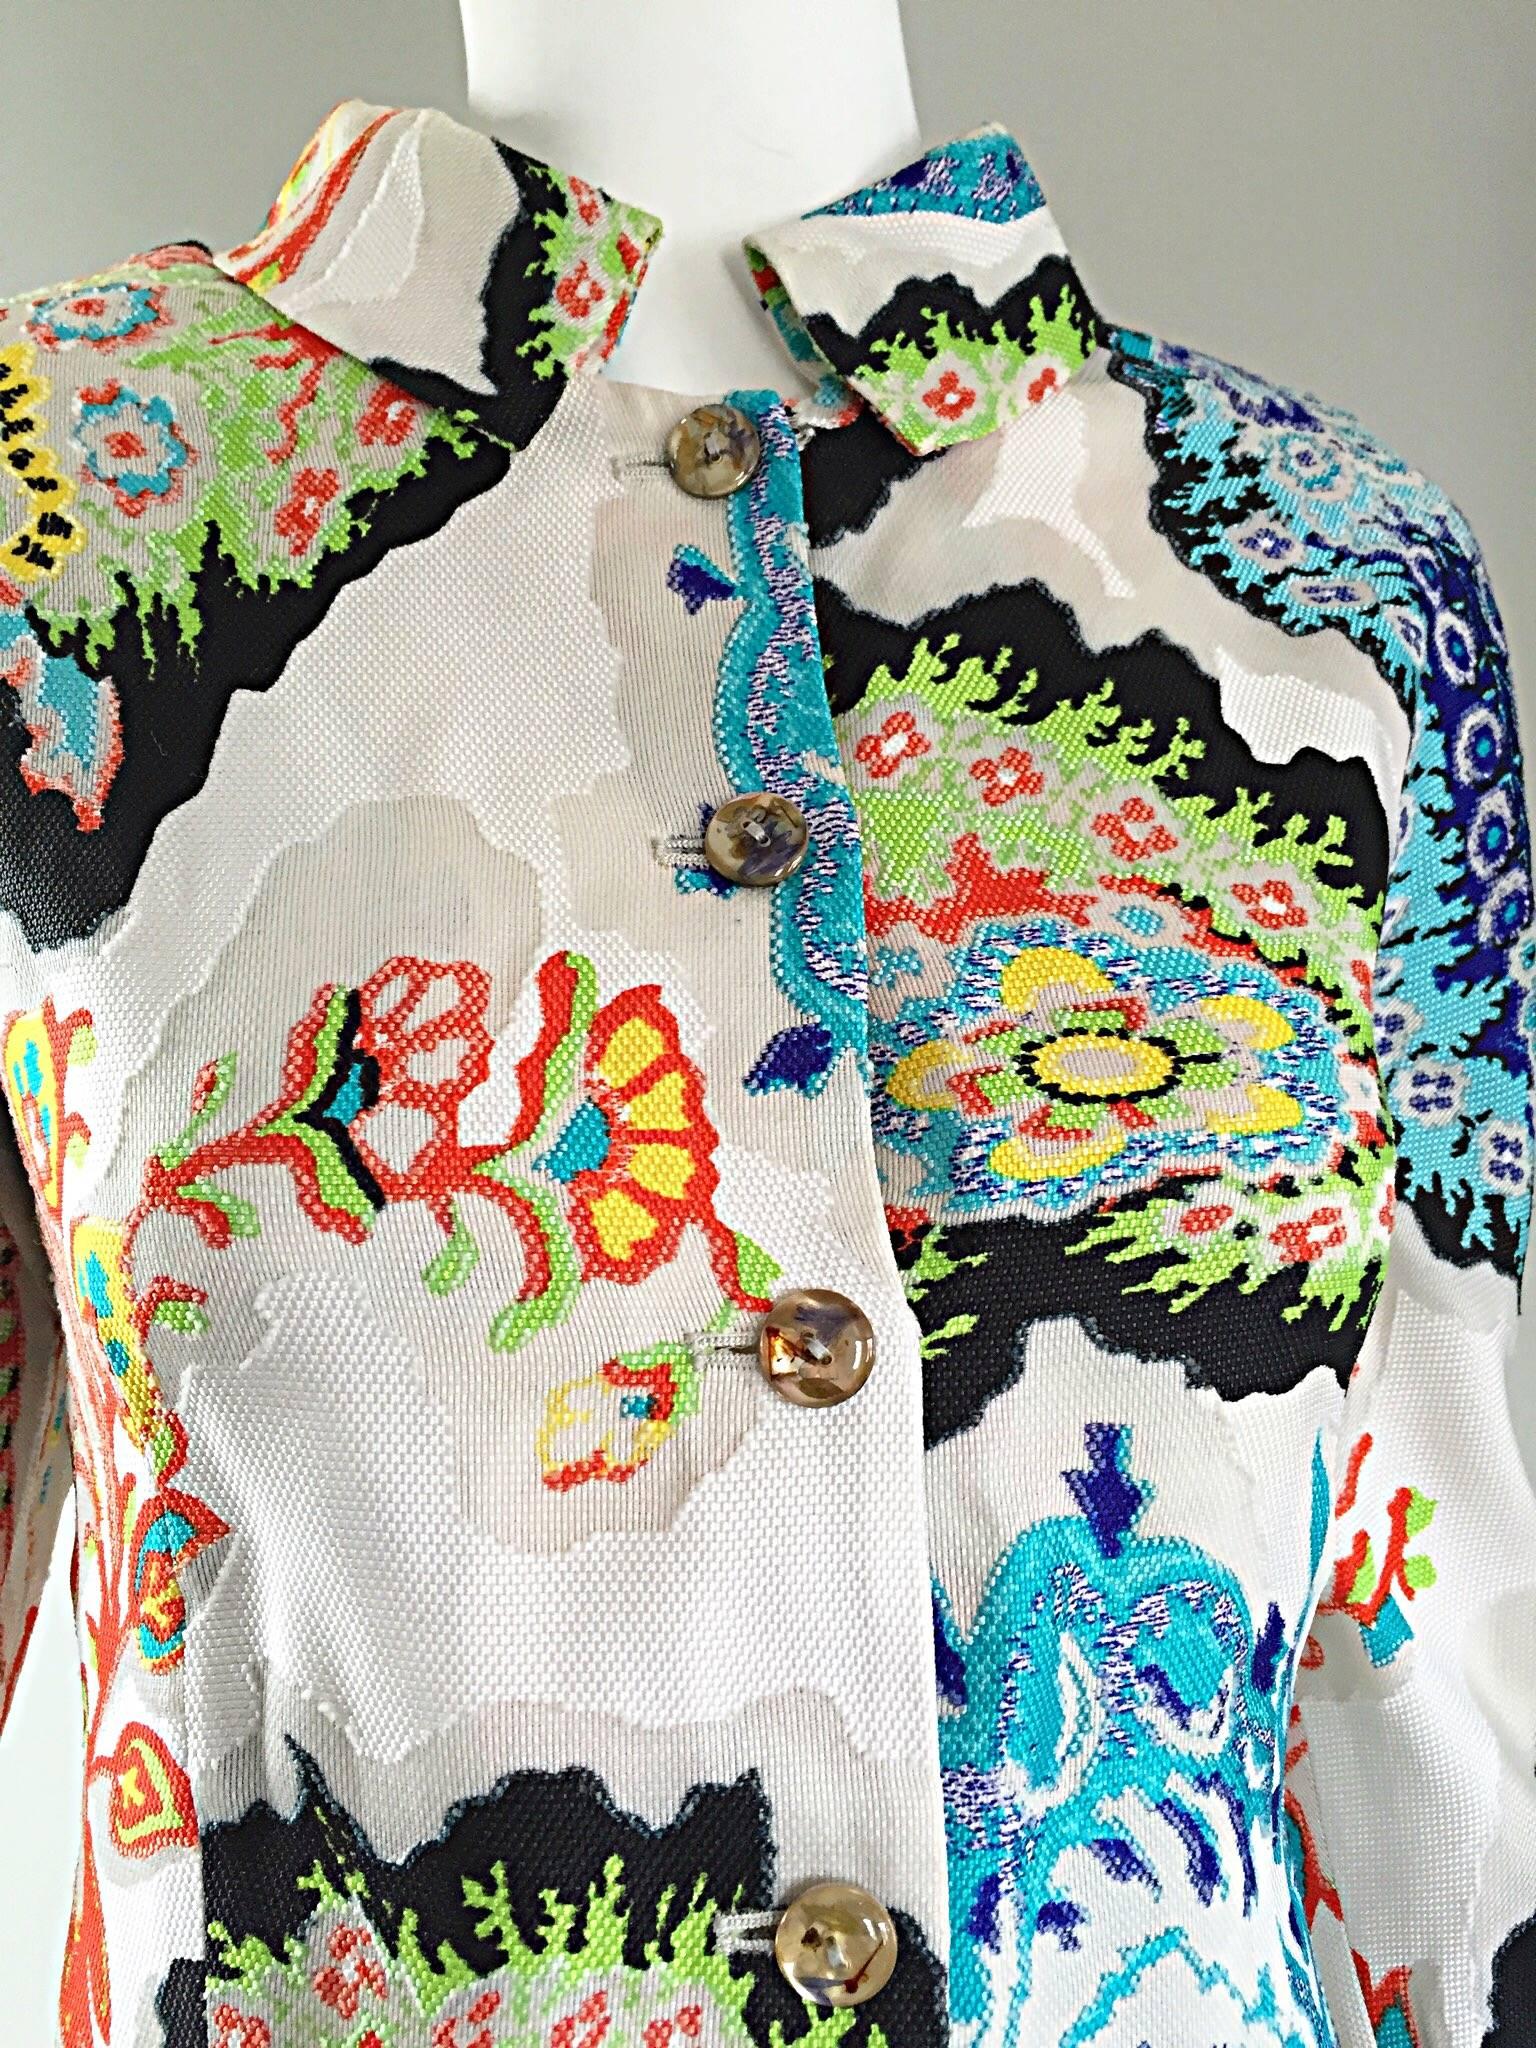 Christian Lacroix Vintage Embroidered Amazing Colorful 1990s 90s Jacket Blazer  3